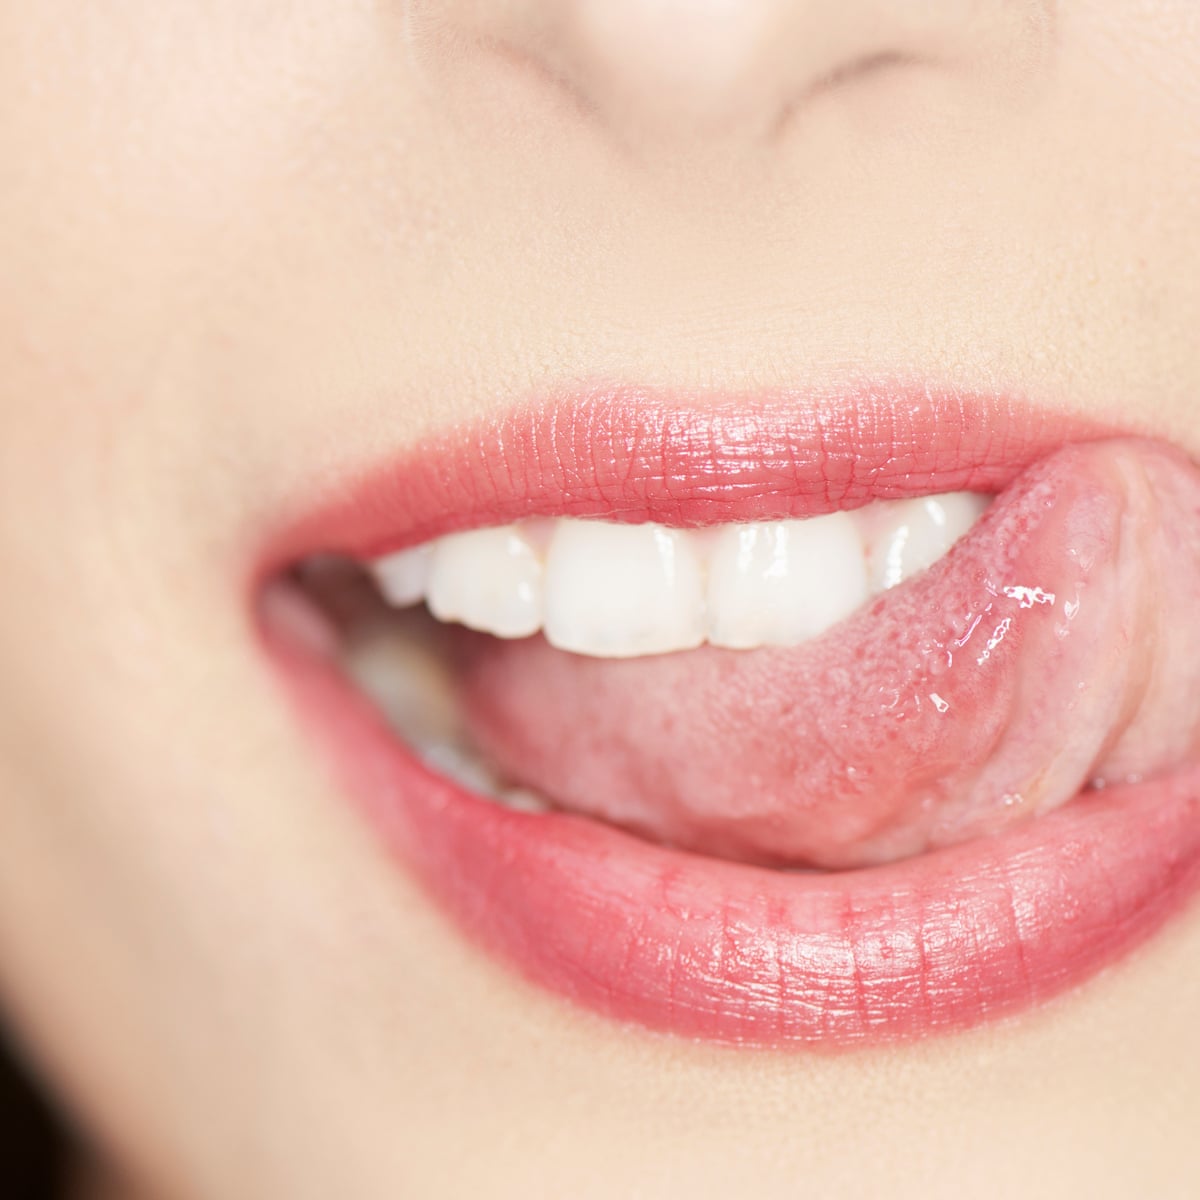 Cure Chapped Lips Fast Without Chapstick